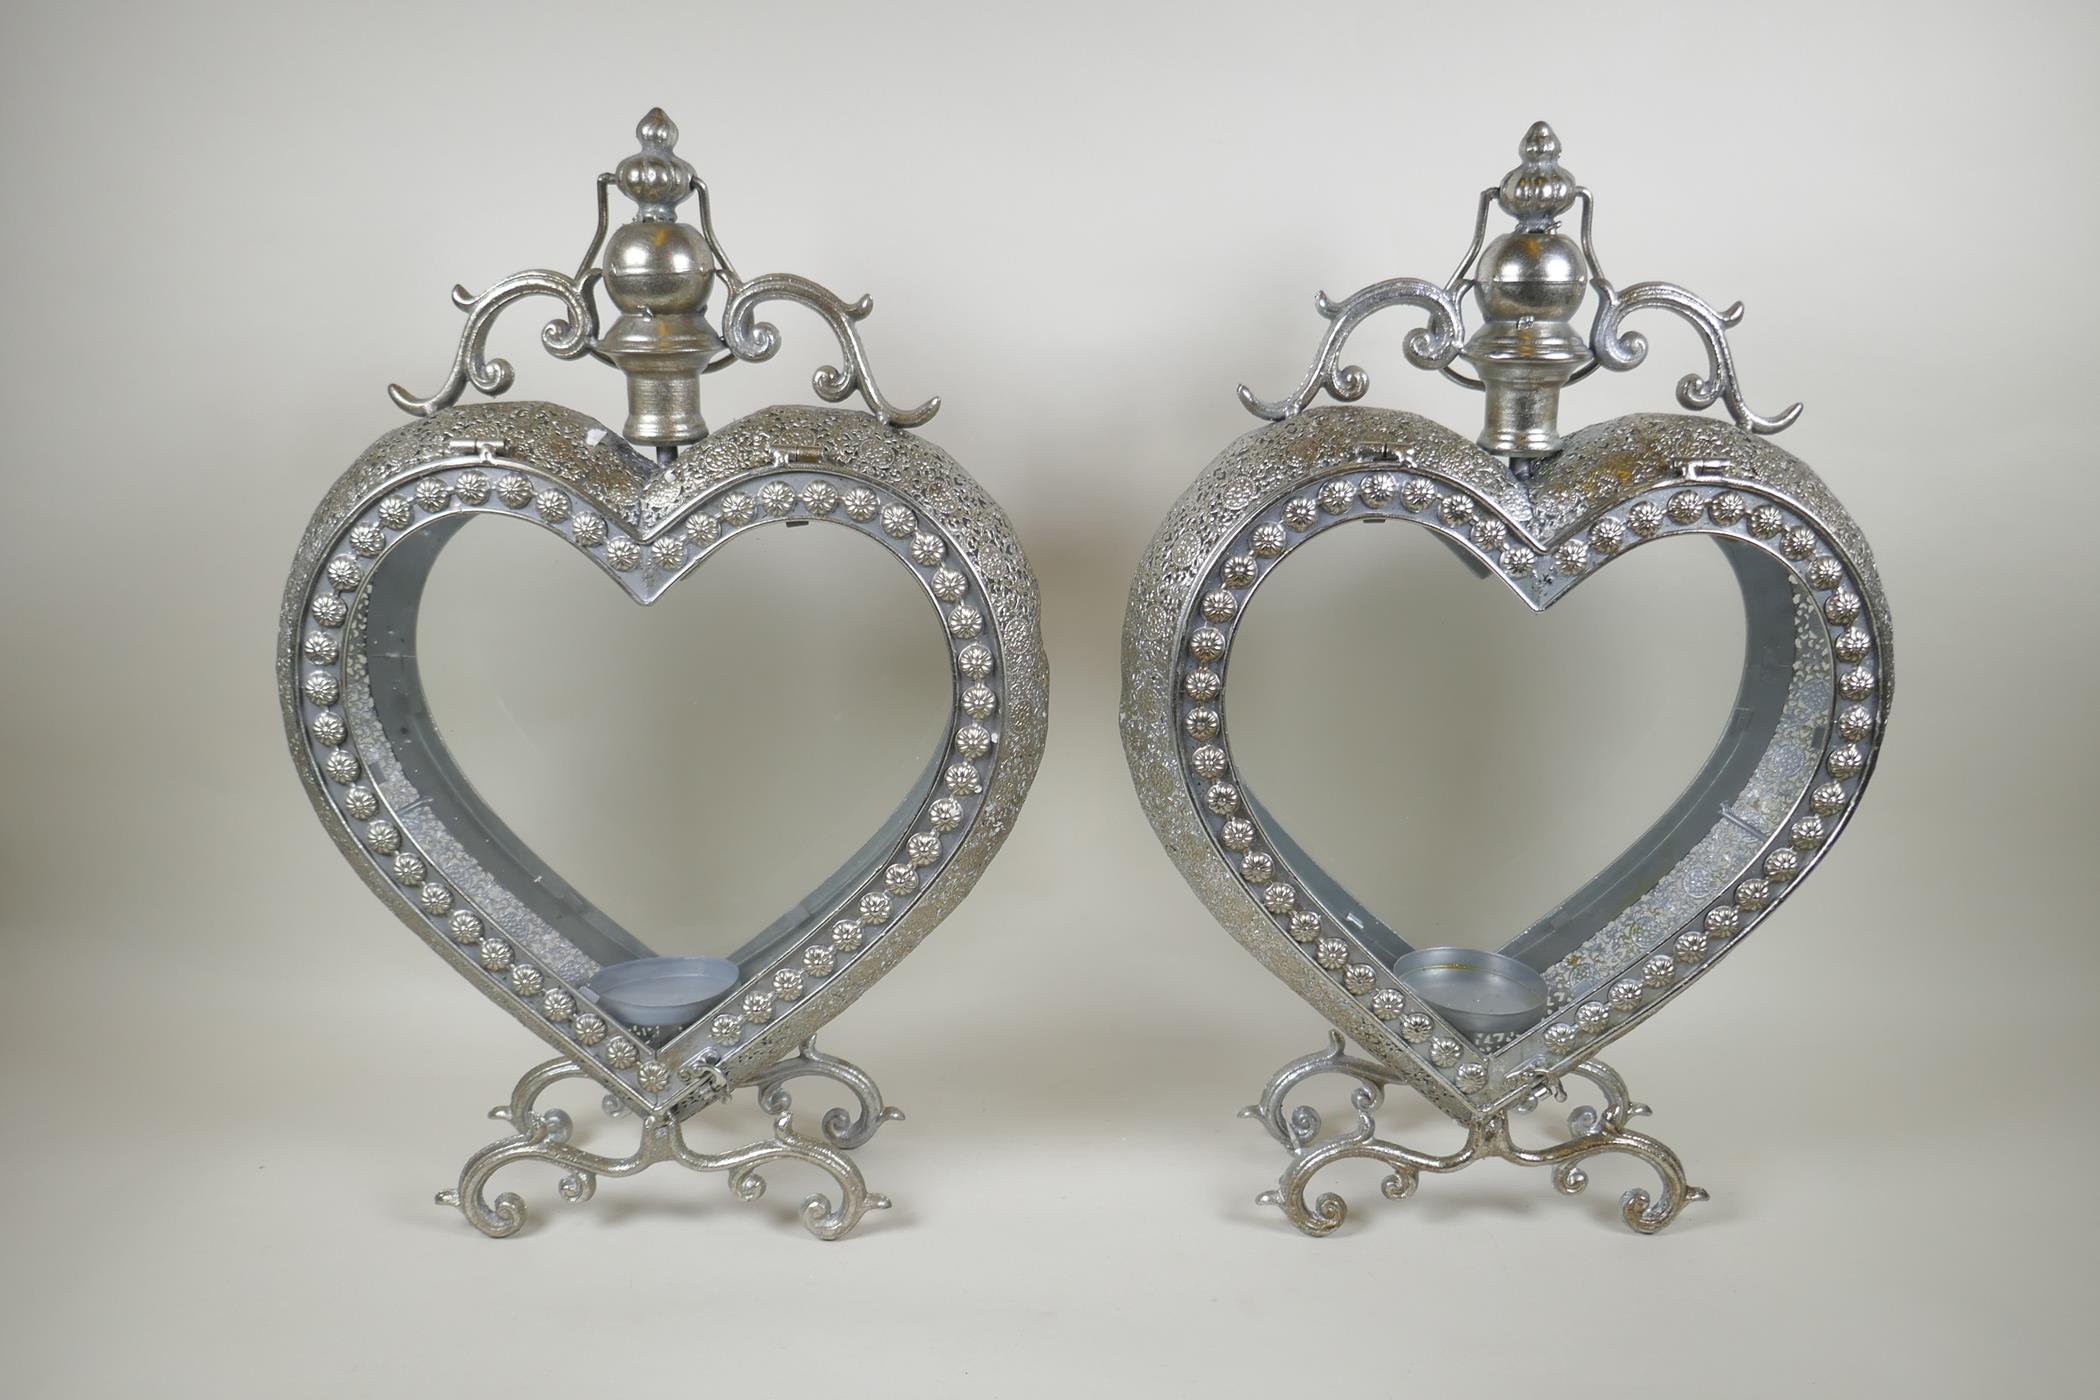 A pair of silvered metal heart shaped lanterns, 51cm high